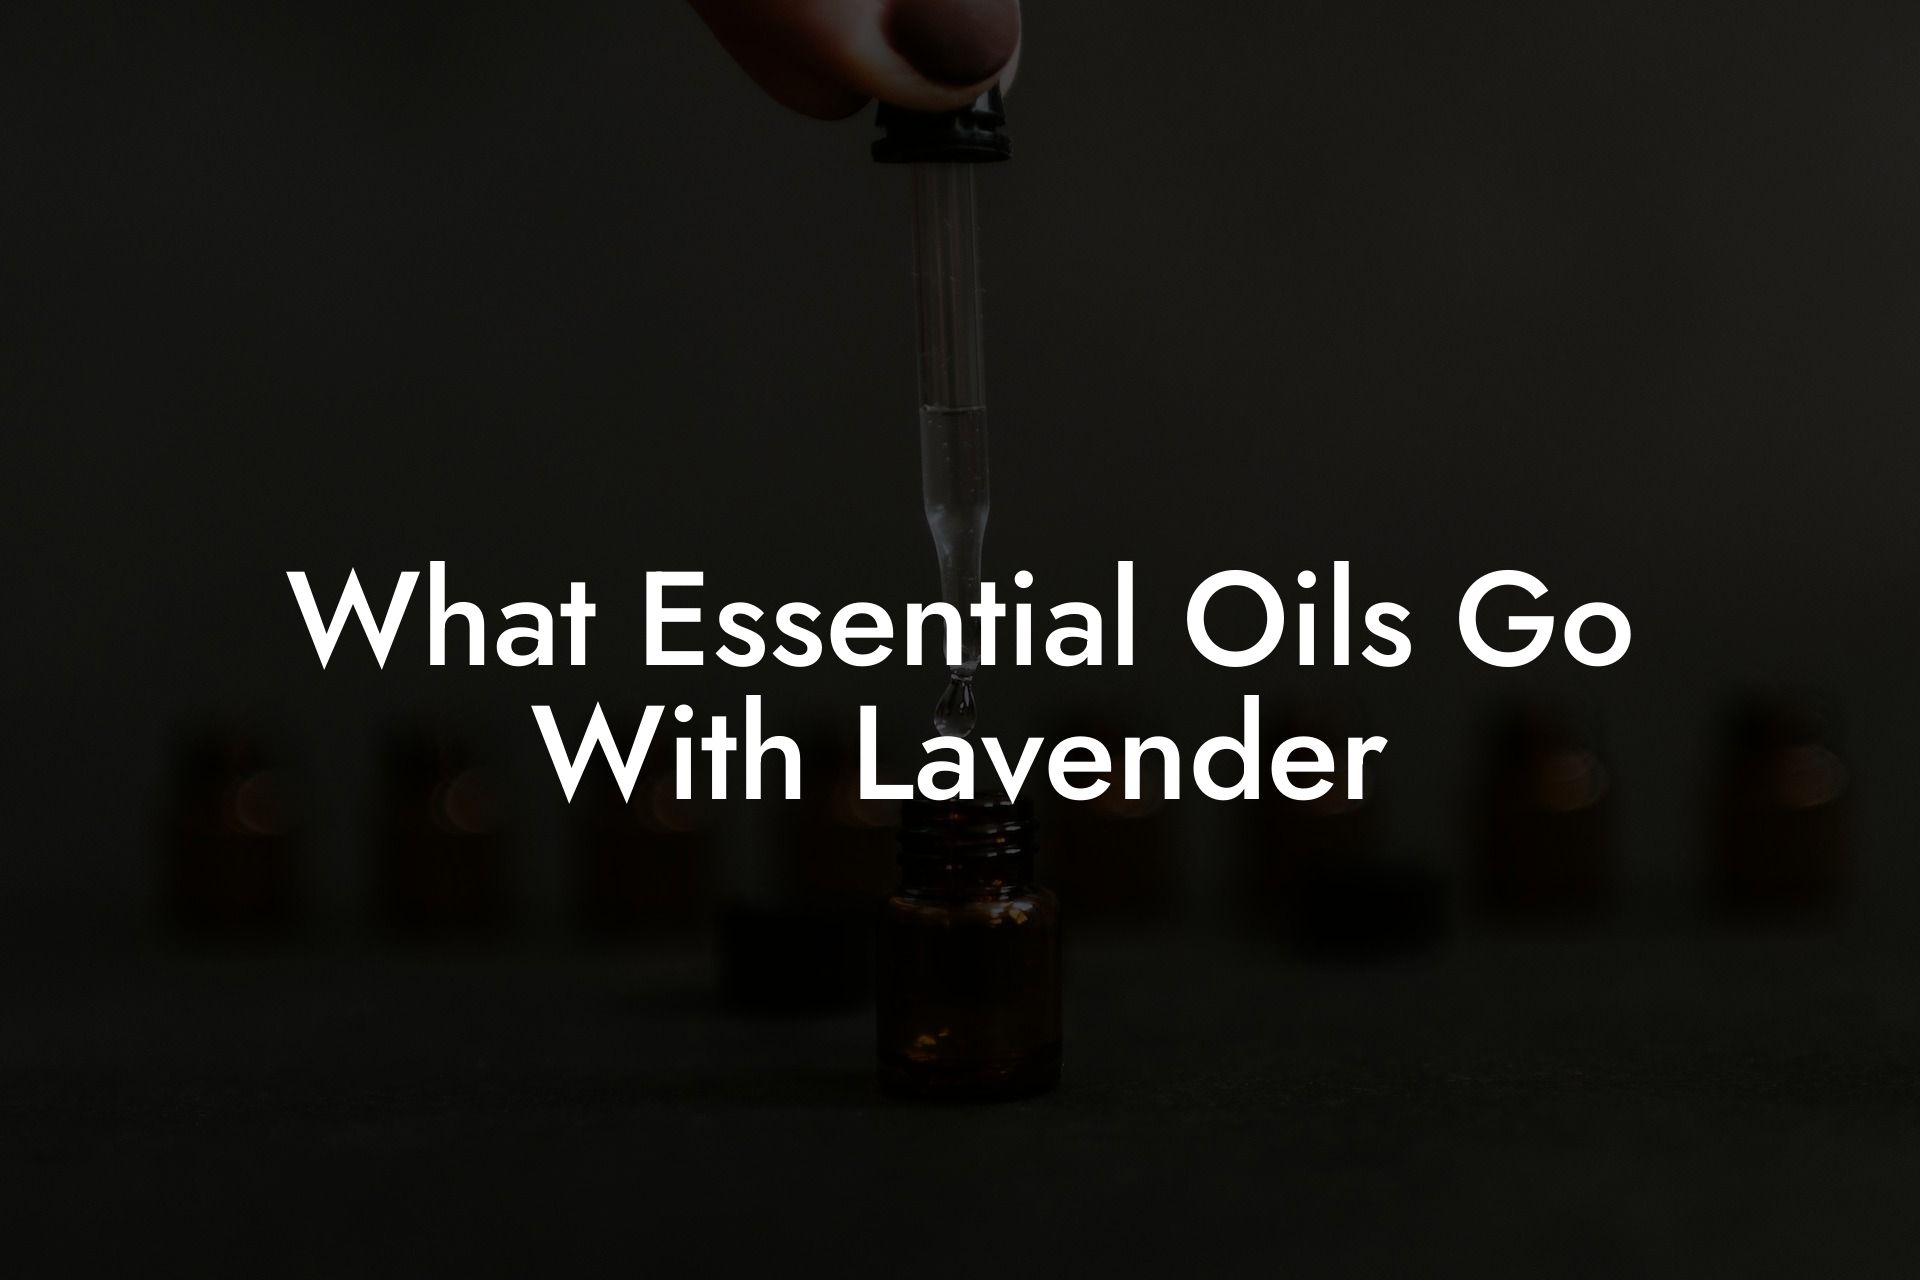 What Essential Oils Go With Lavender